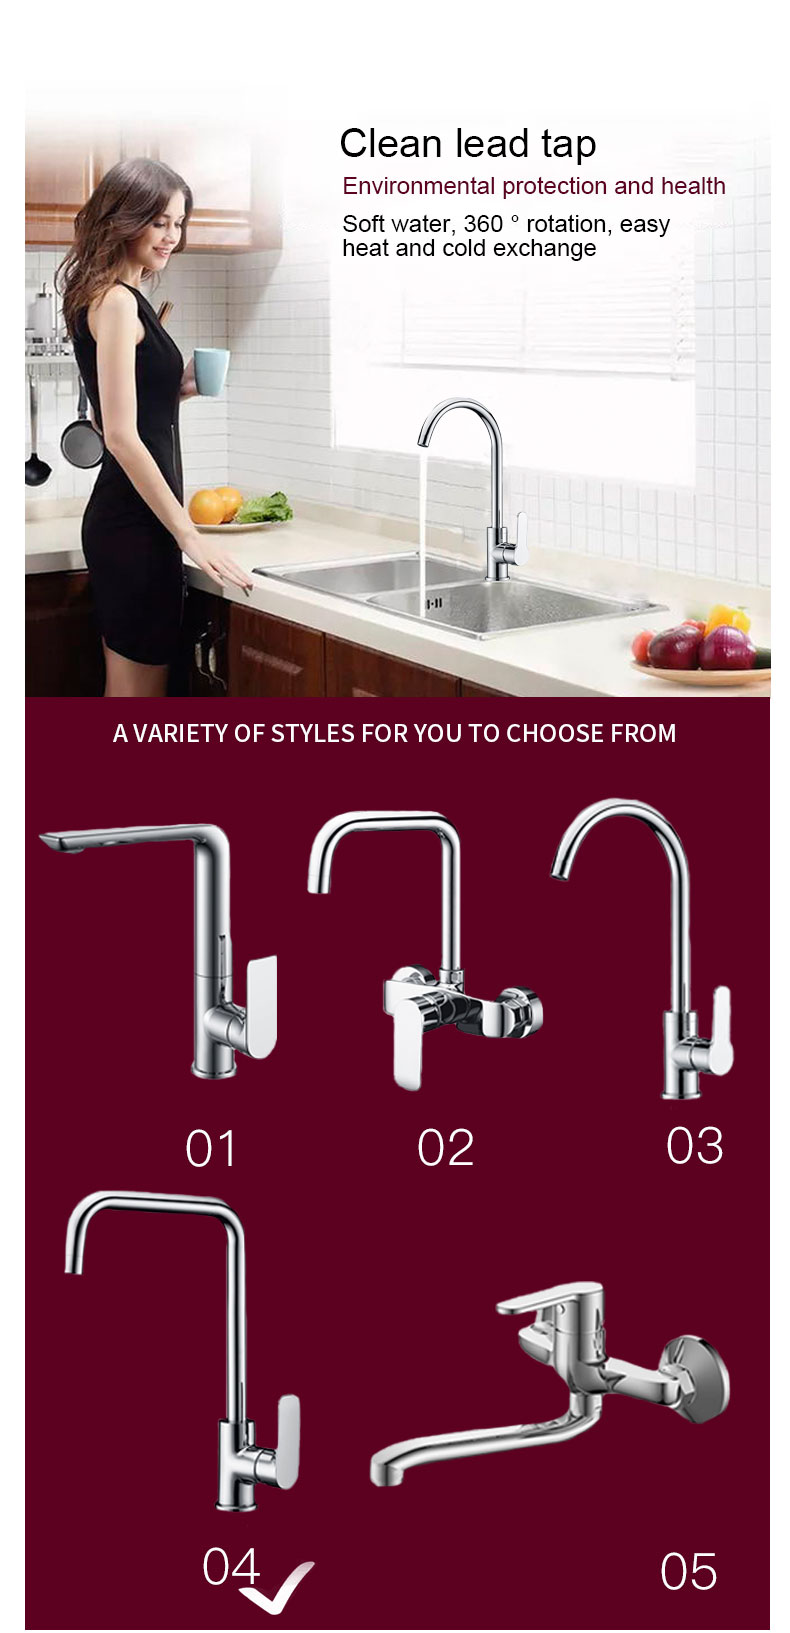 thermostatic mixer shower manufacturers